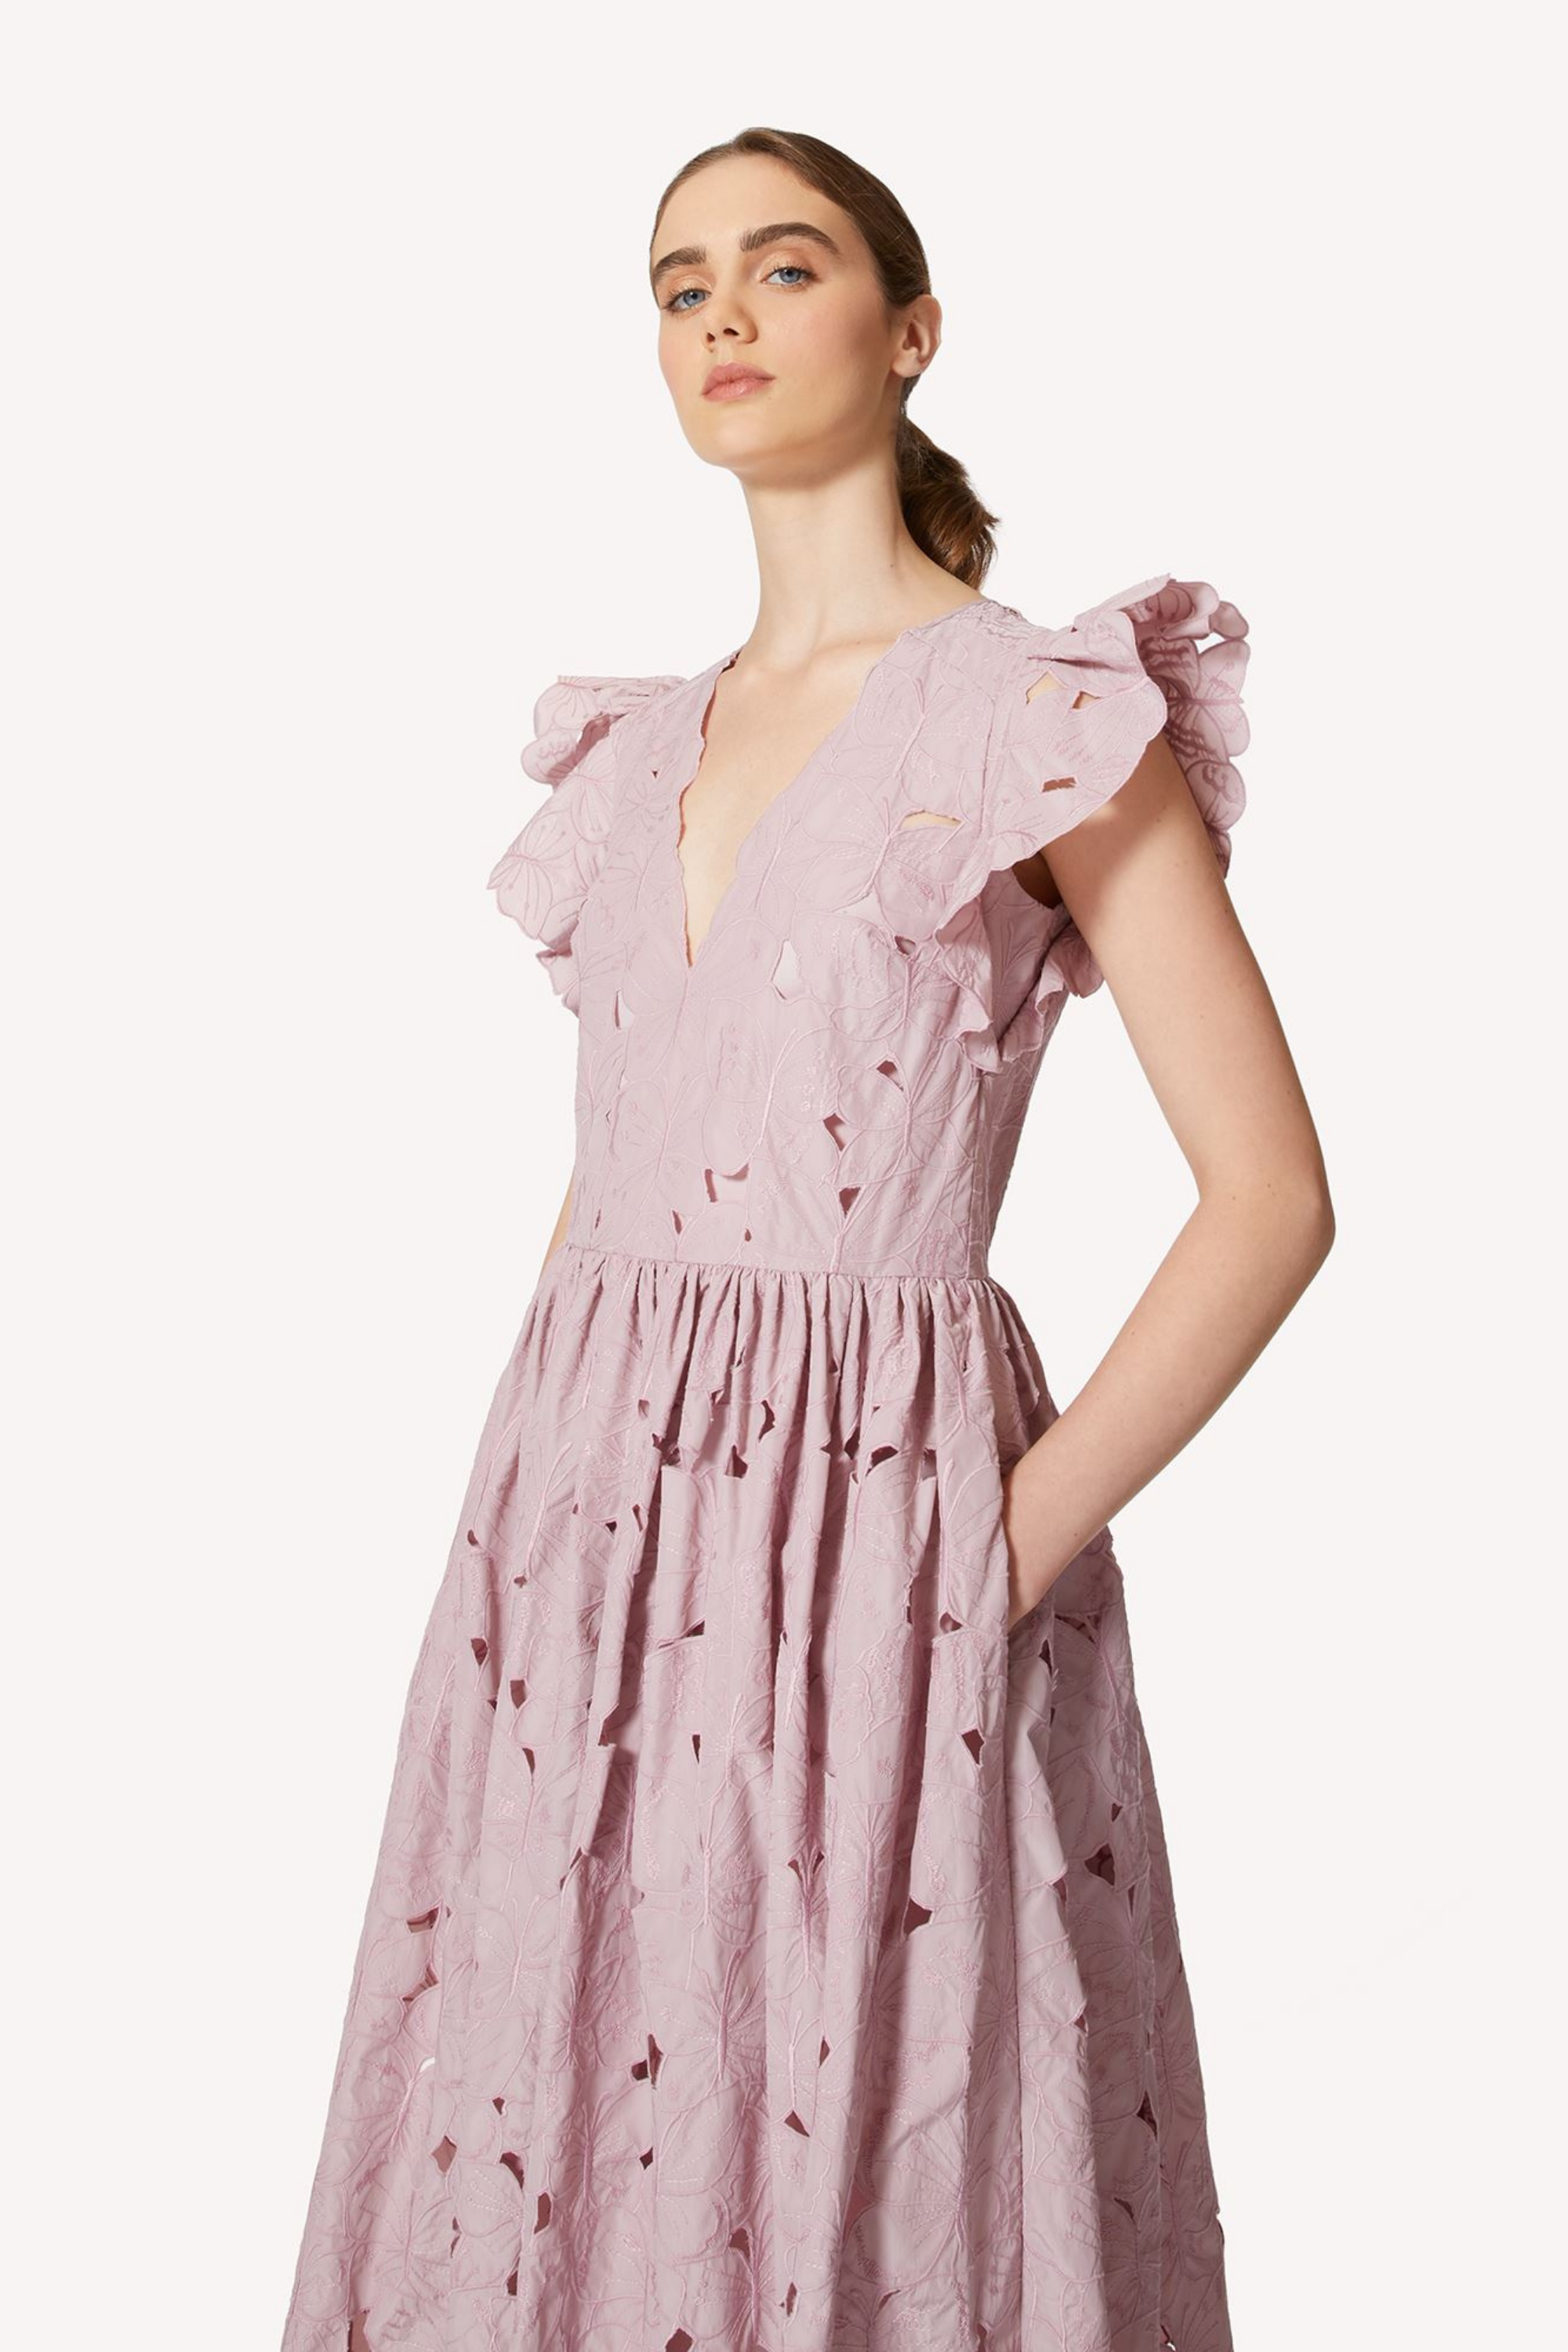 Taffeta Dress with Butterfly Cut-Out by Red Valentino, Colour: Mauve, Ruffled Sleeves, New Arrivals SS22, Espace Cannelle Luxury Store